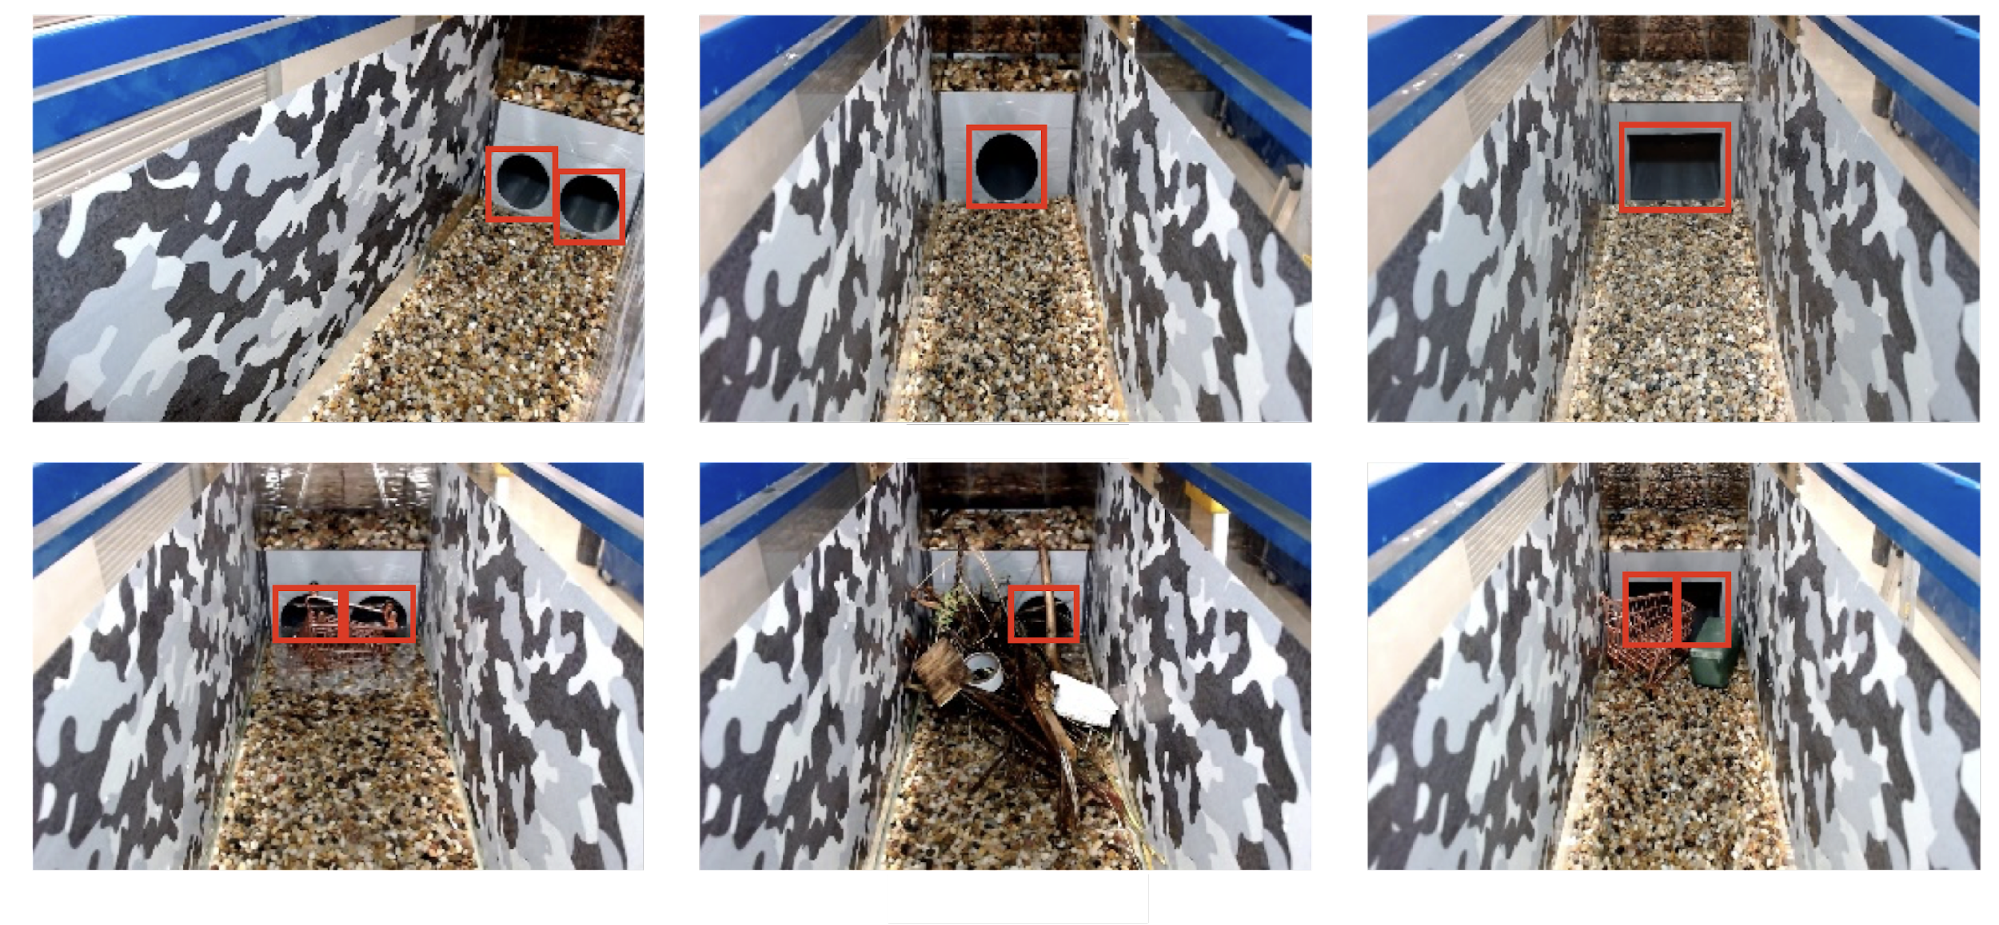 Photos of culvert samples from the VHD dataset with bounding box annotations.